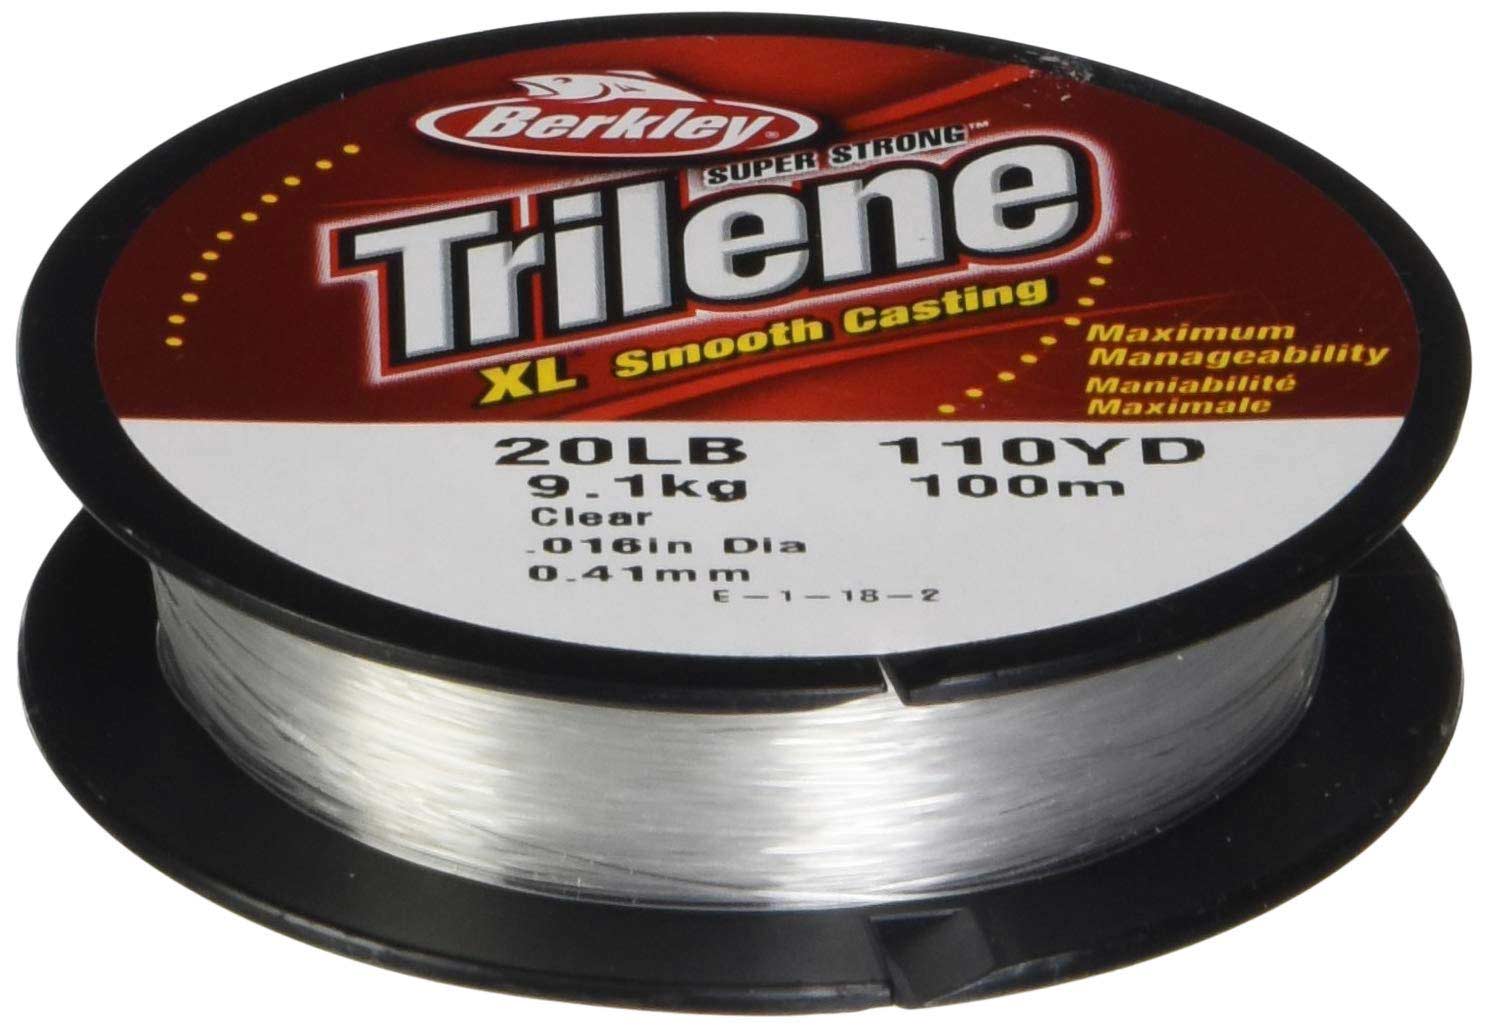 Choosing a Fishing Line: Which is the Best Braid for you? - On The